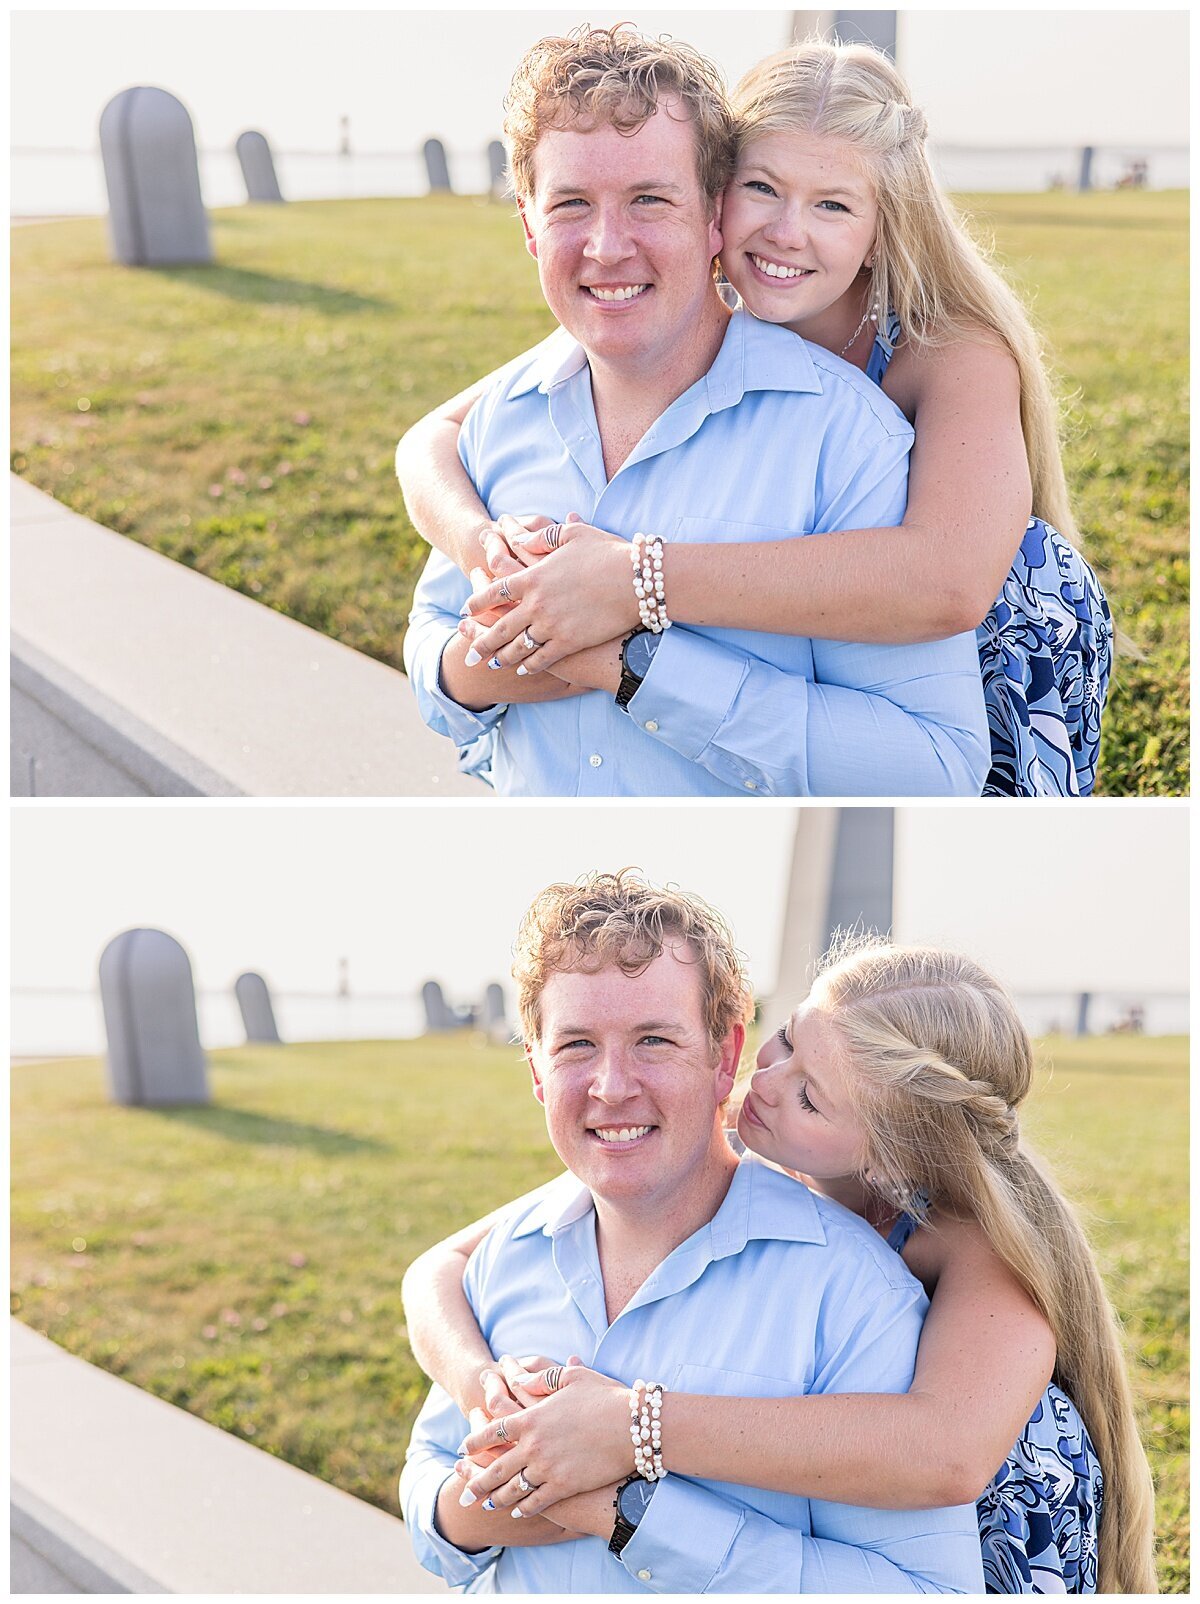 Lorie-Lyn Photography - Family Massachusetts Photography - Westport MA- Engagement Session_0007